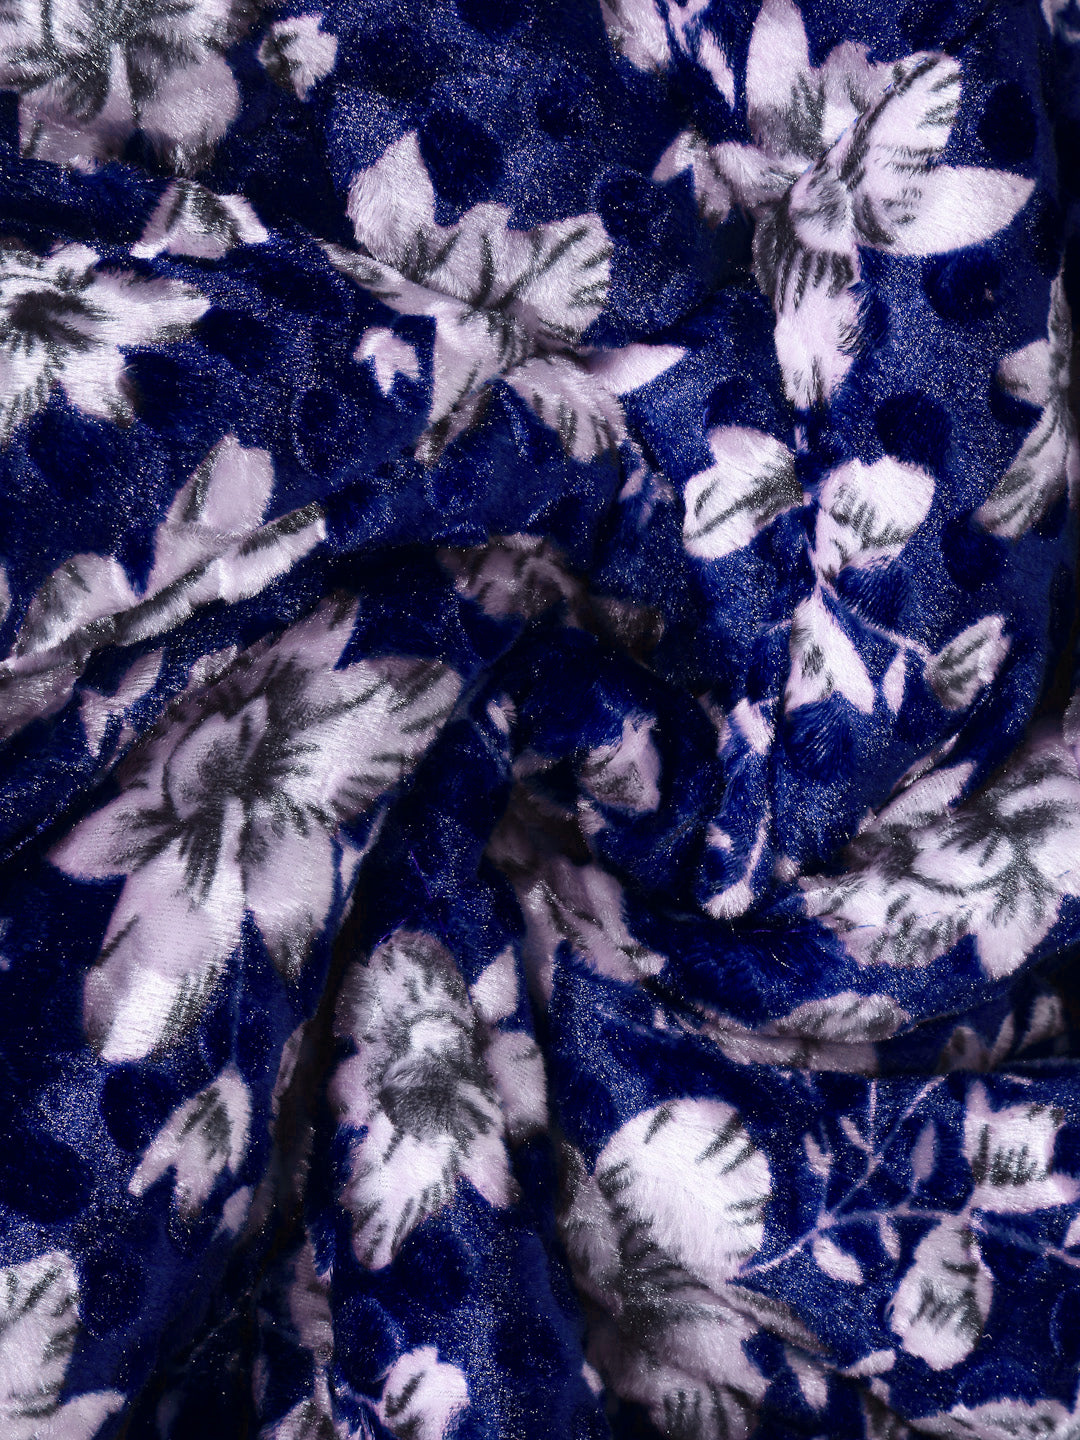 Klotthe Blue Floral Printed 800 GSM Heavy Winter Double Bed Quilt